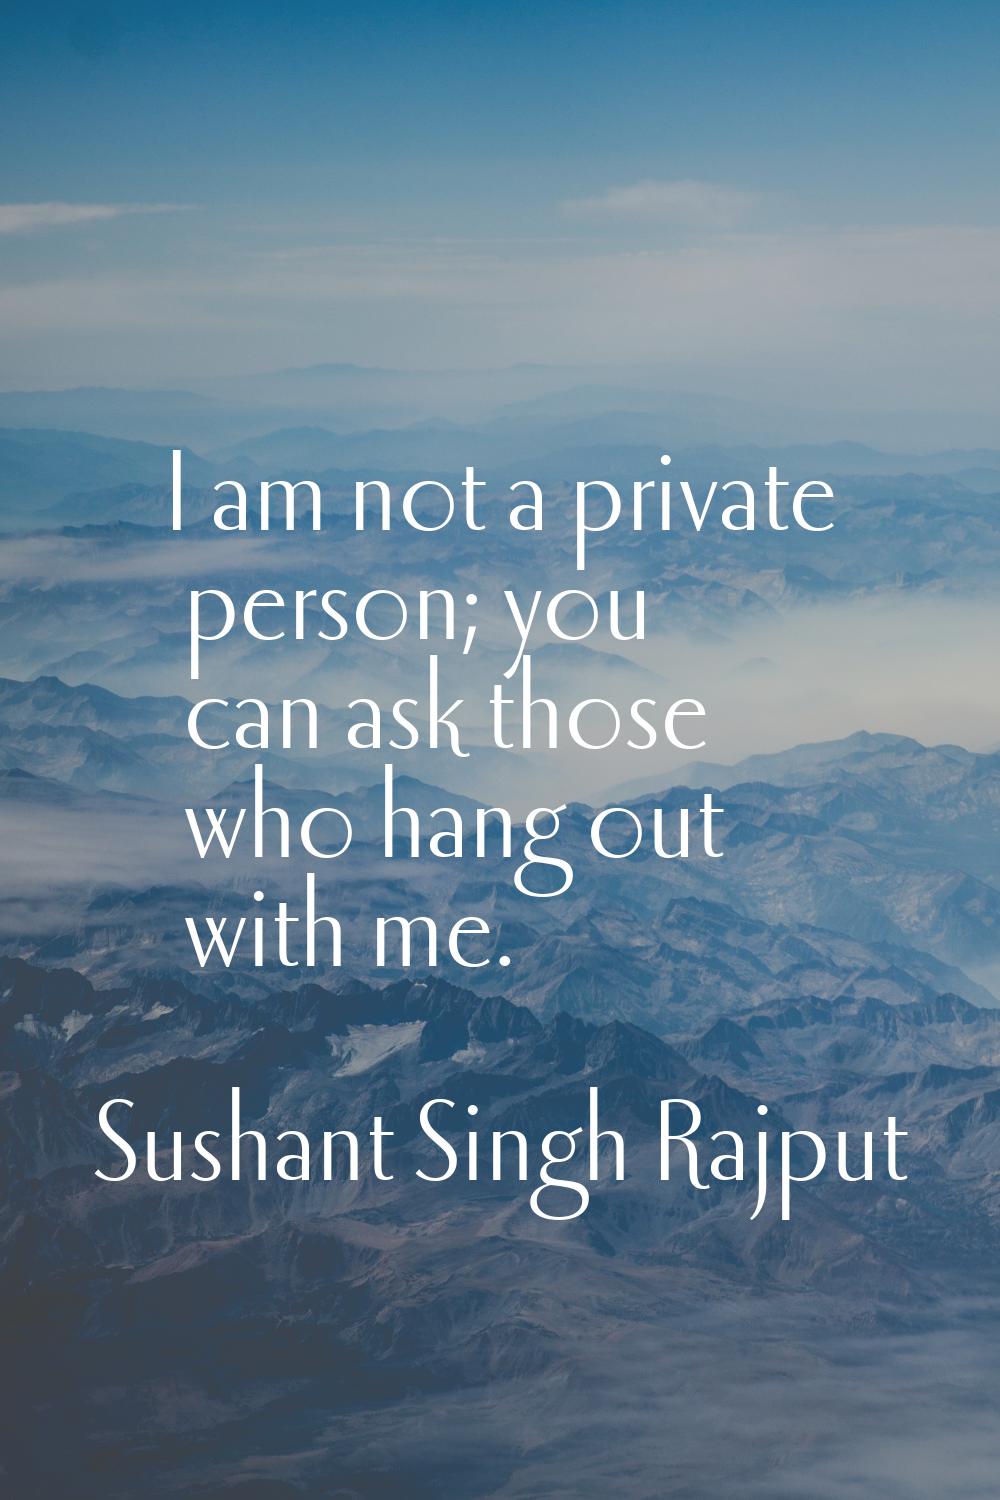 I am not a private person; you can ask those who hang out with me.